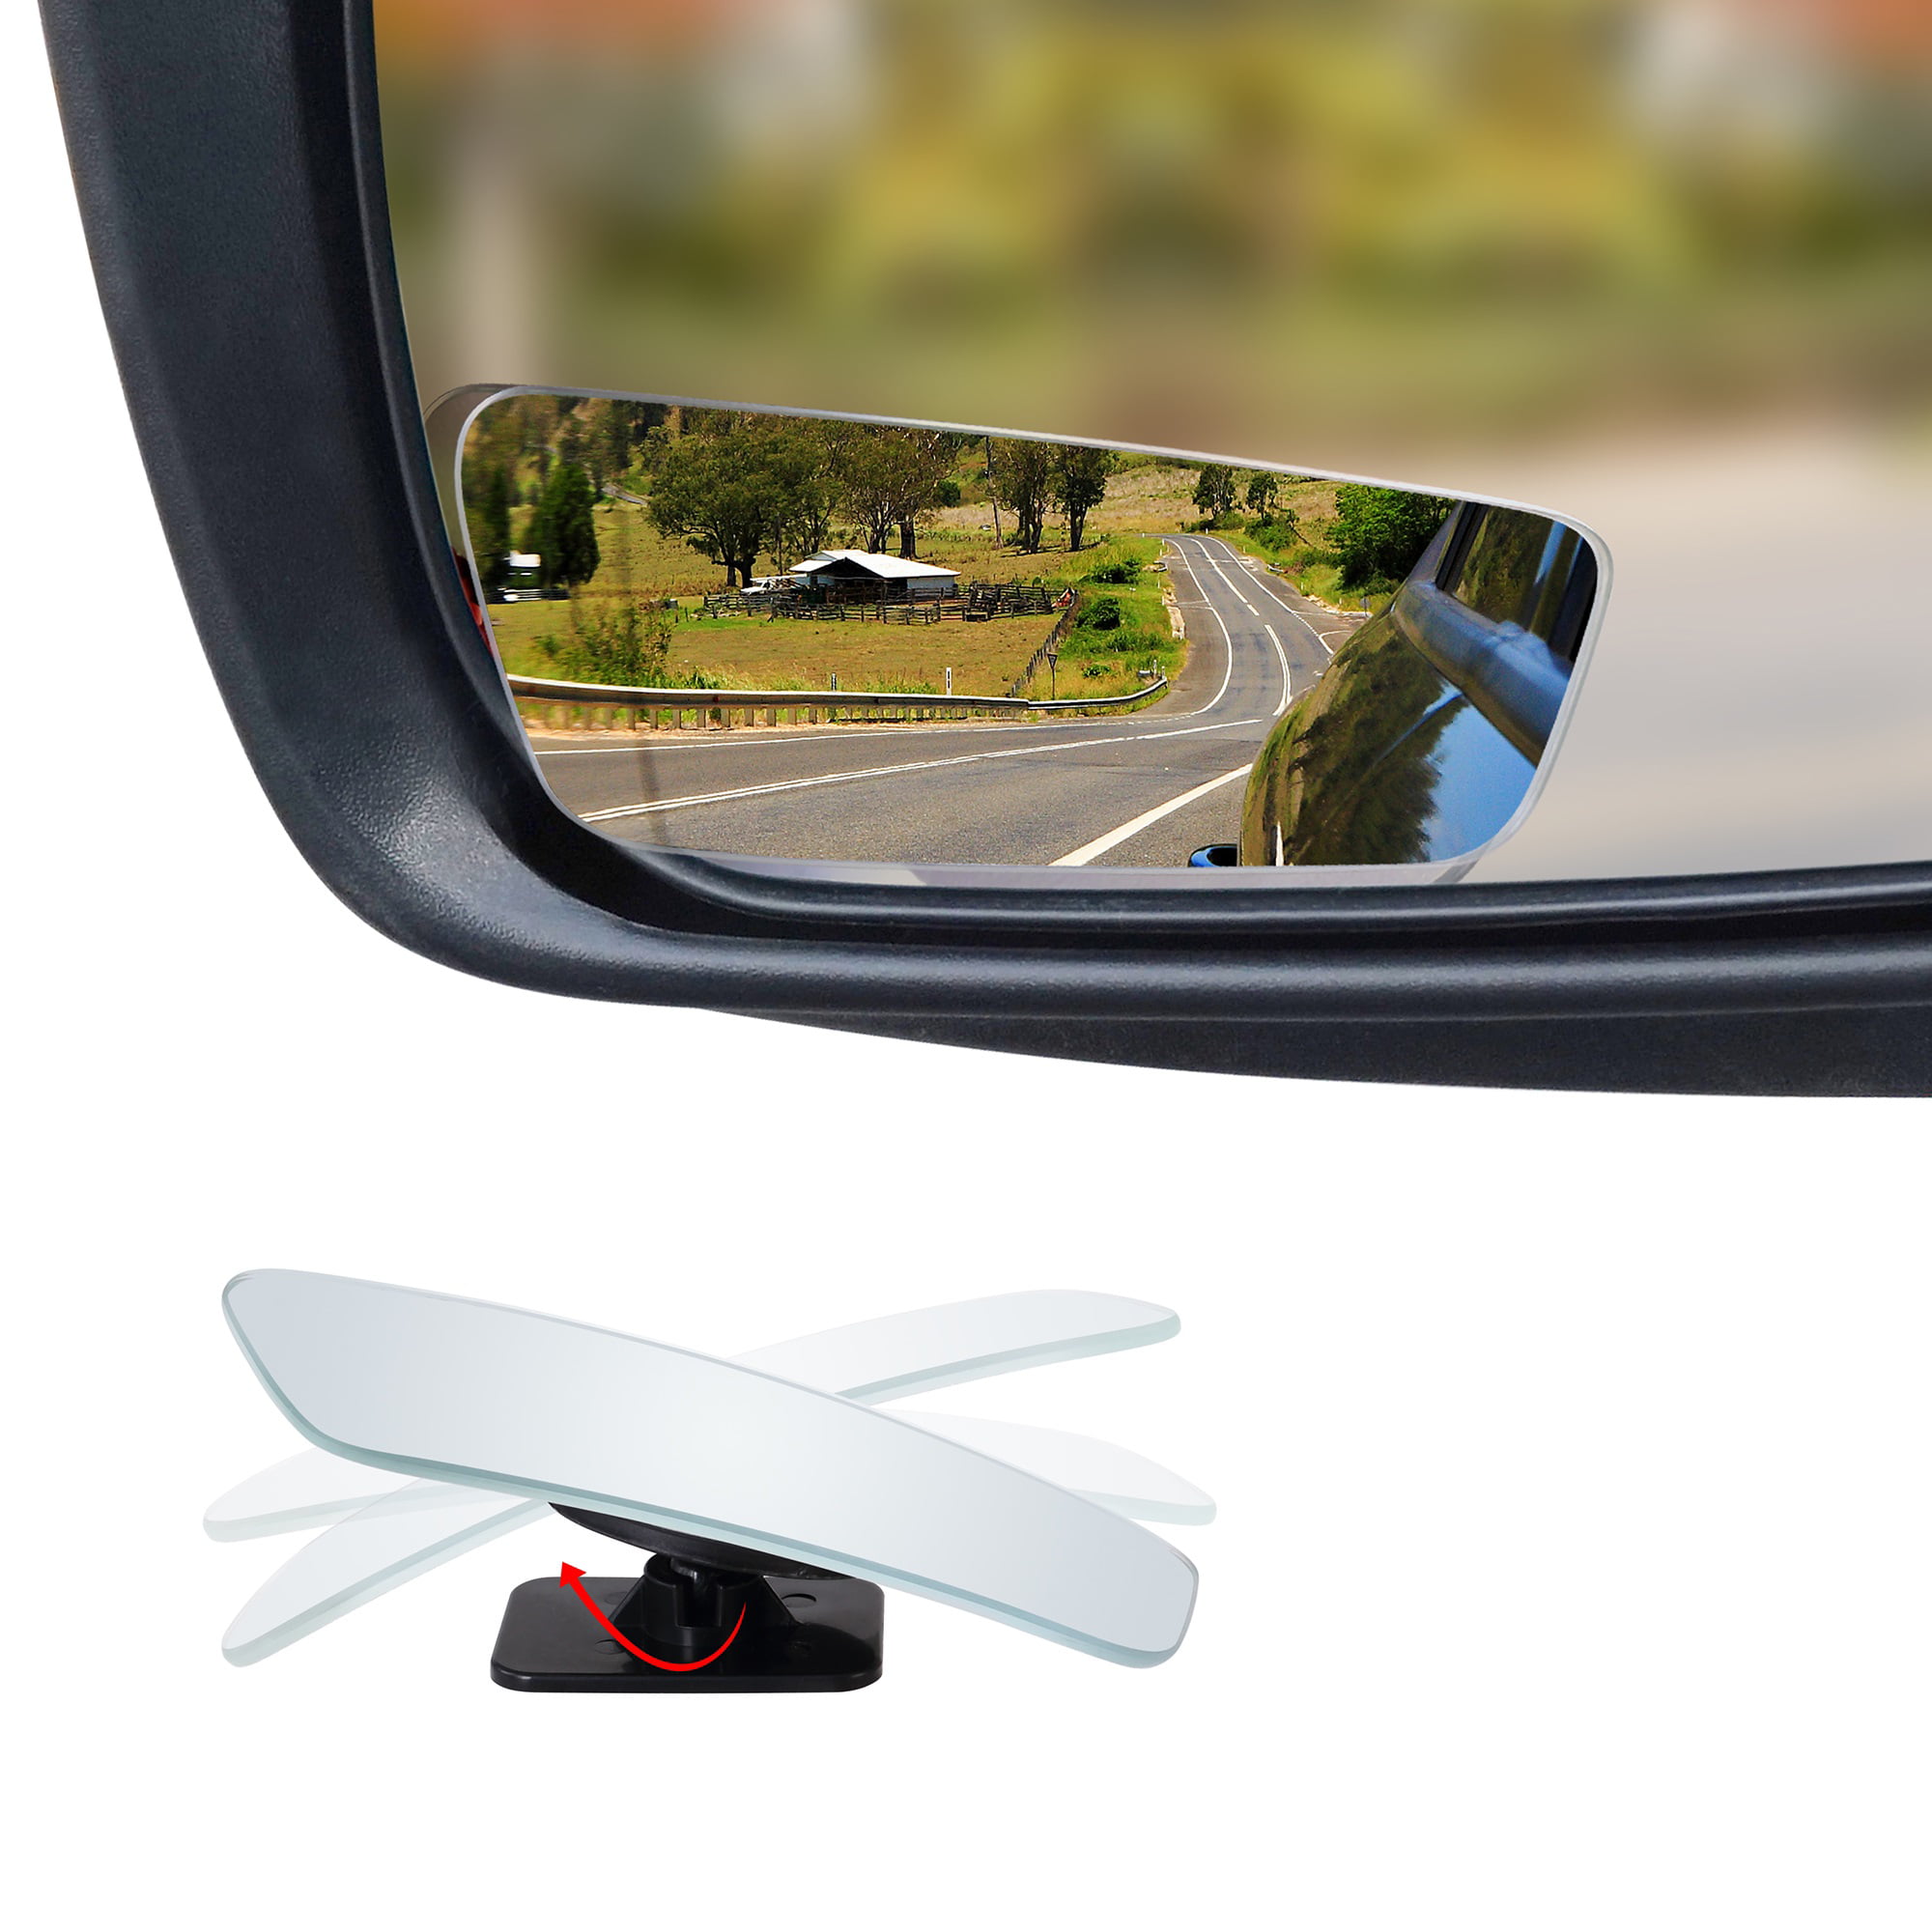 Summit Replacement Mirror Glass Fits on lhs of vehicle